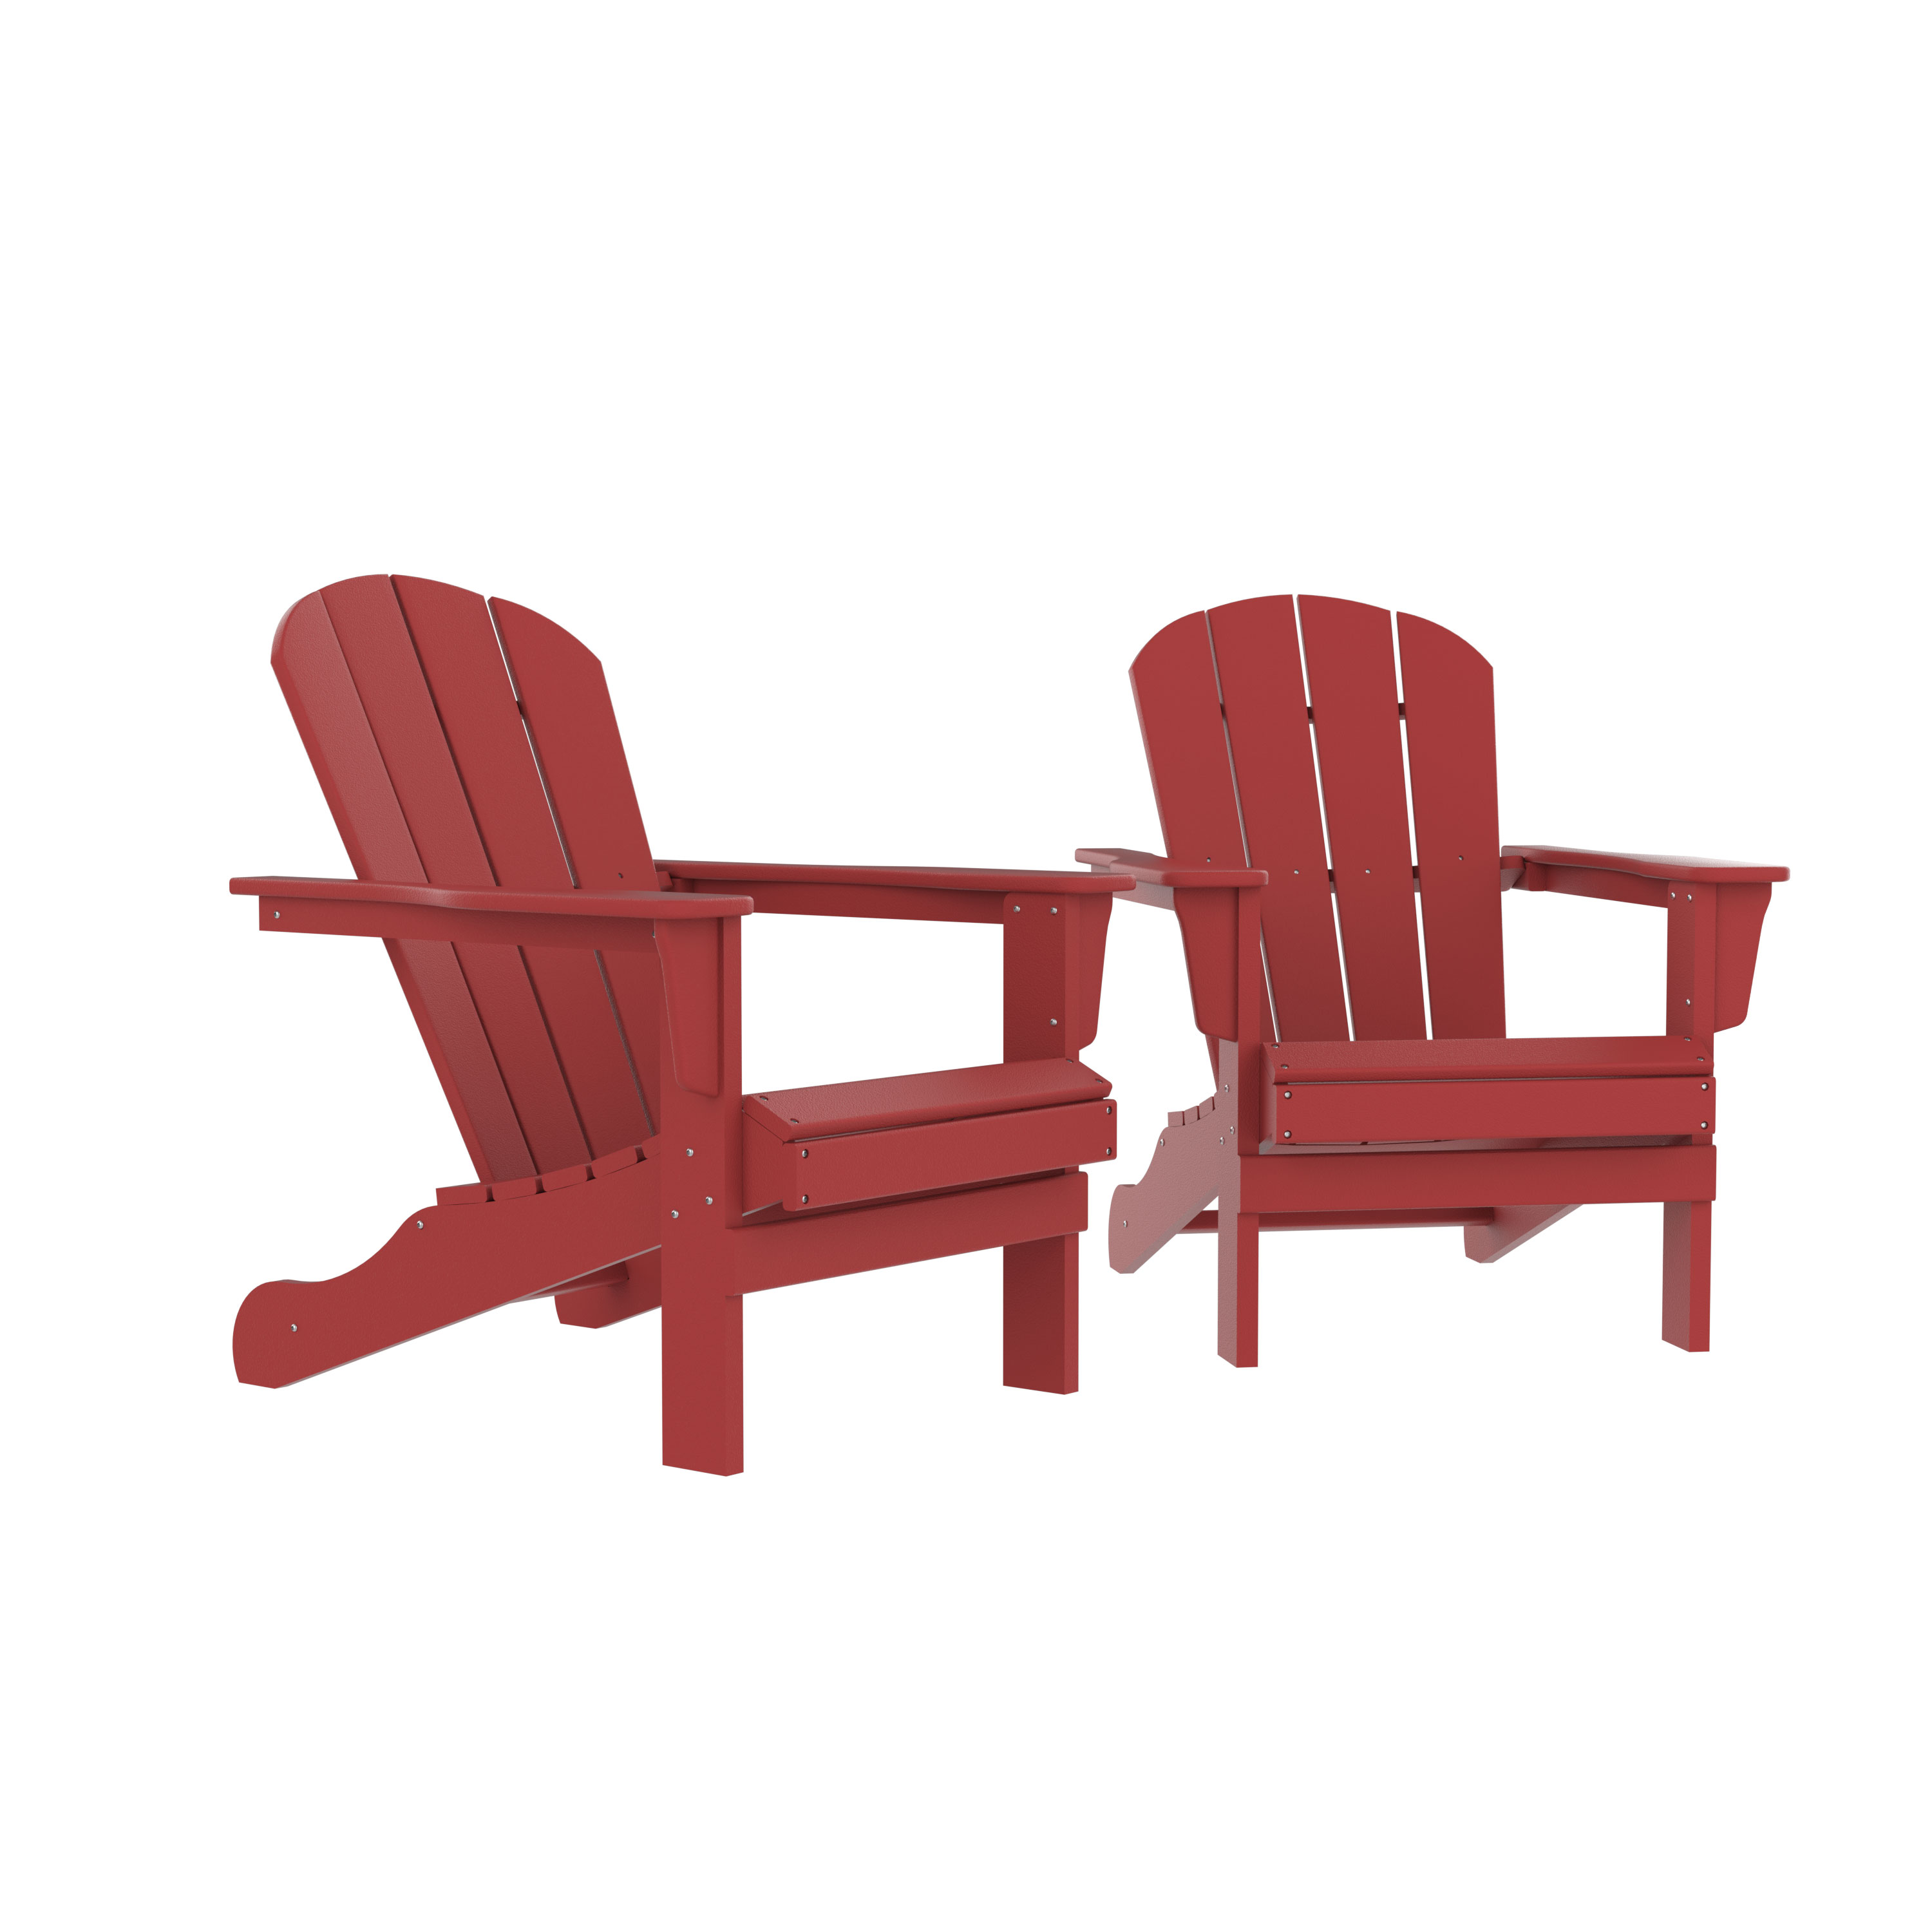 CoSoTower Adirondack Chair, Fire Pit Chairs, Sand Chair, Patio Outdoor Chairs, Dpe Plastic Resin Deck Chair, Lawn Chairs, Adult Size, Weather Resistant For Patio/ Backyard/Garden, Red, Set Of 2 - image 1 of 6